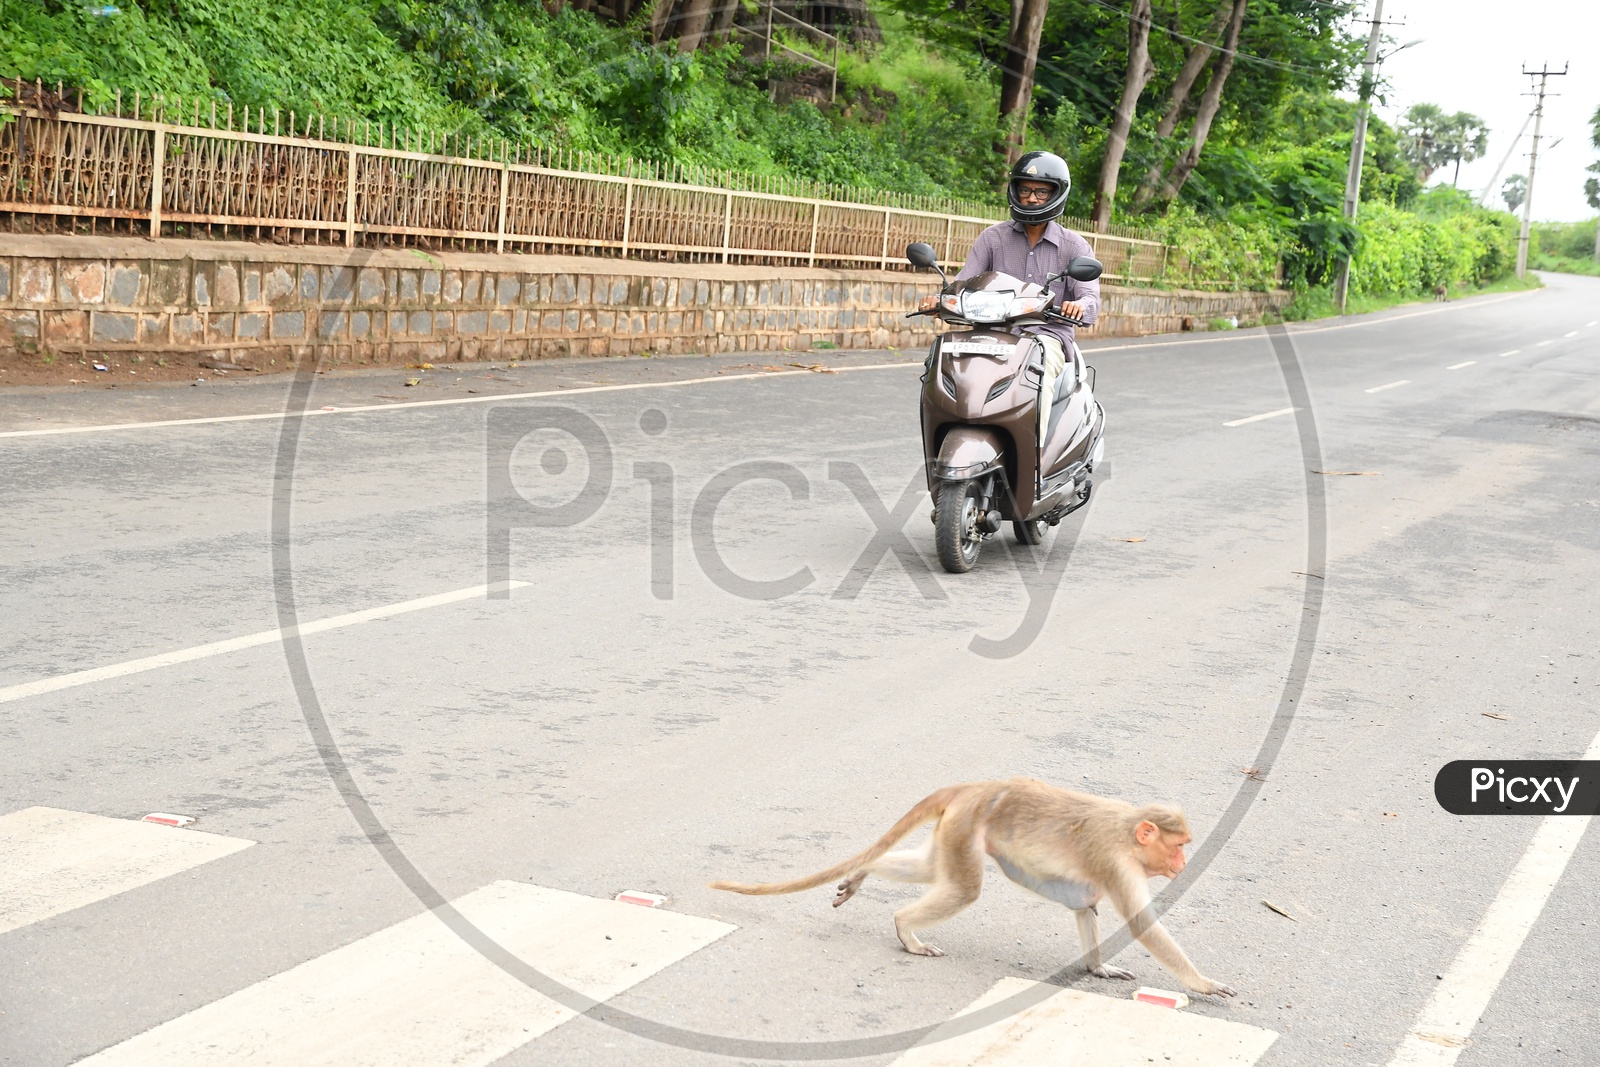 A Monkey moving along the road